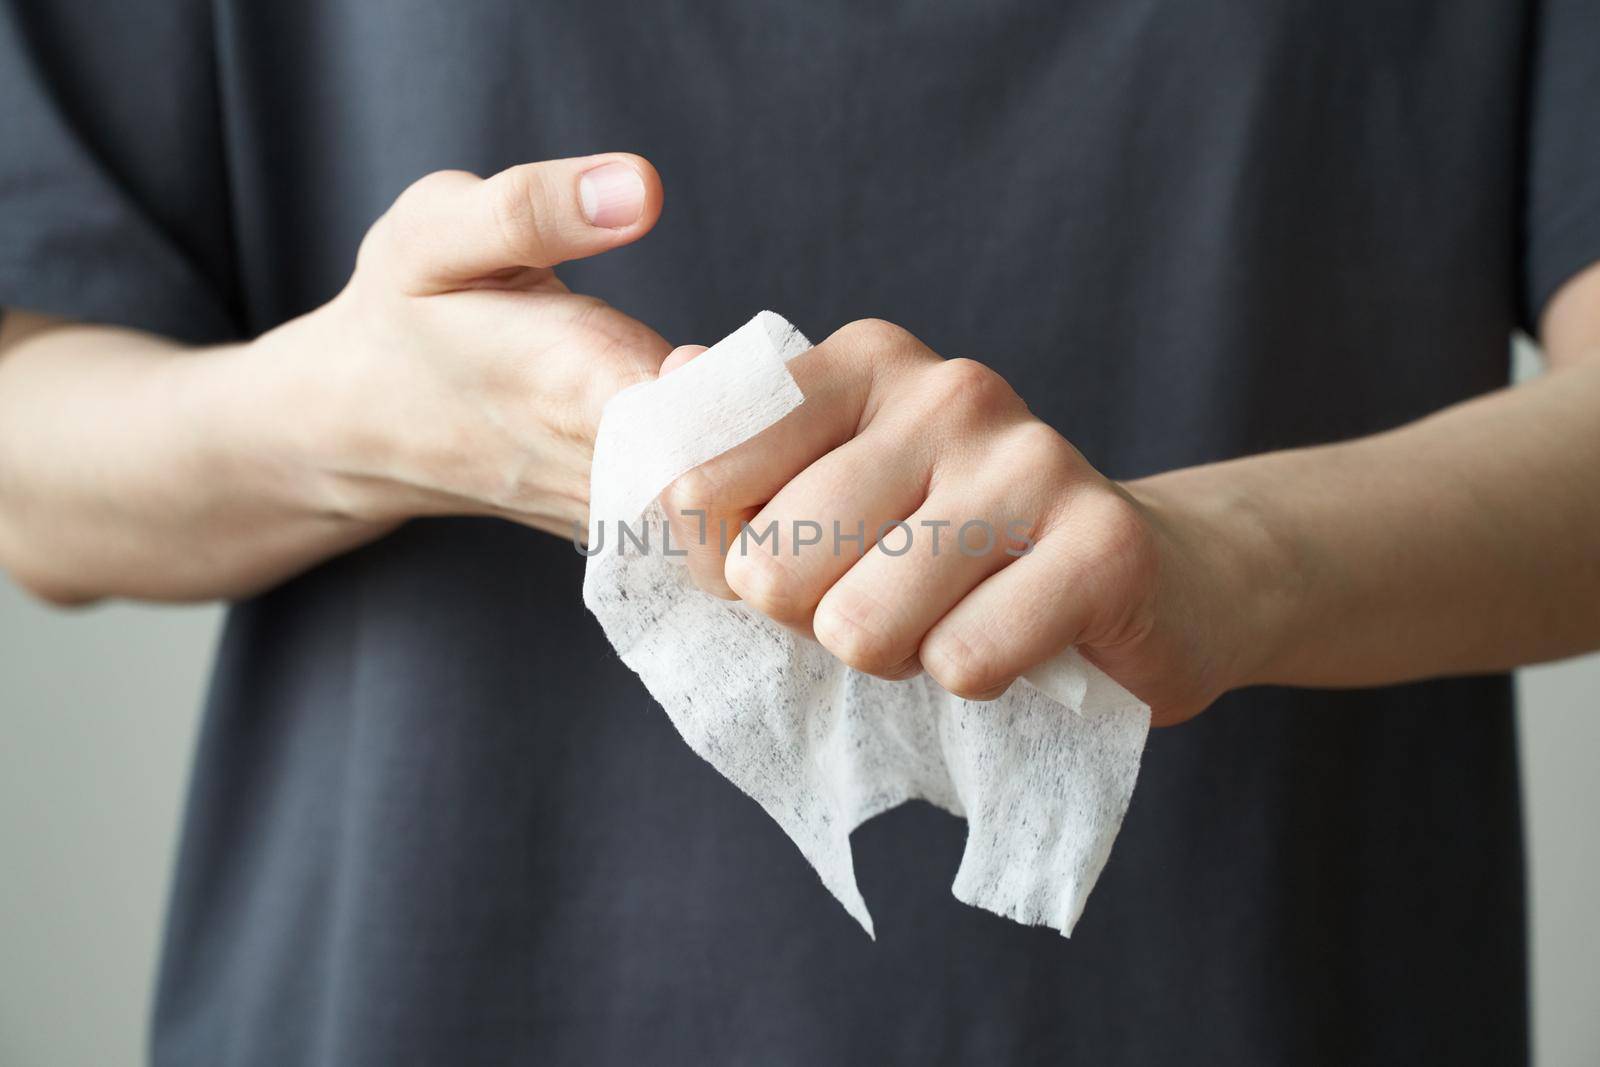 Woman wash hand wet wipes, to prevent illness Novel coronavirus 2019-nCoV after public place. Antiseptic, Hygiene and Healthcare concept